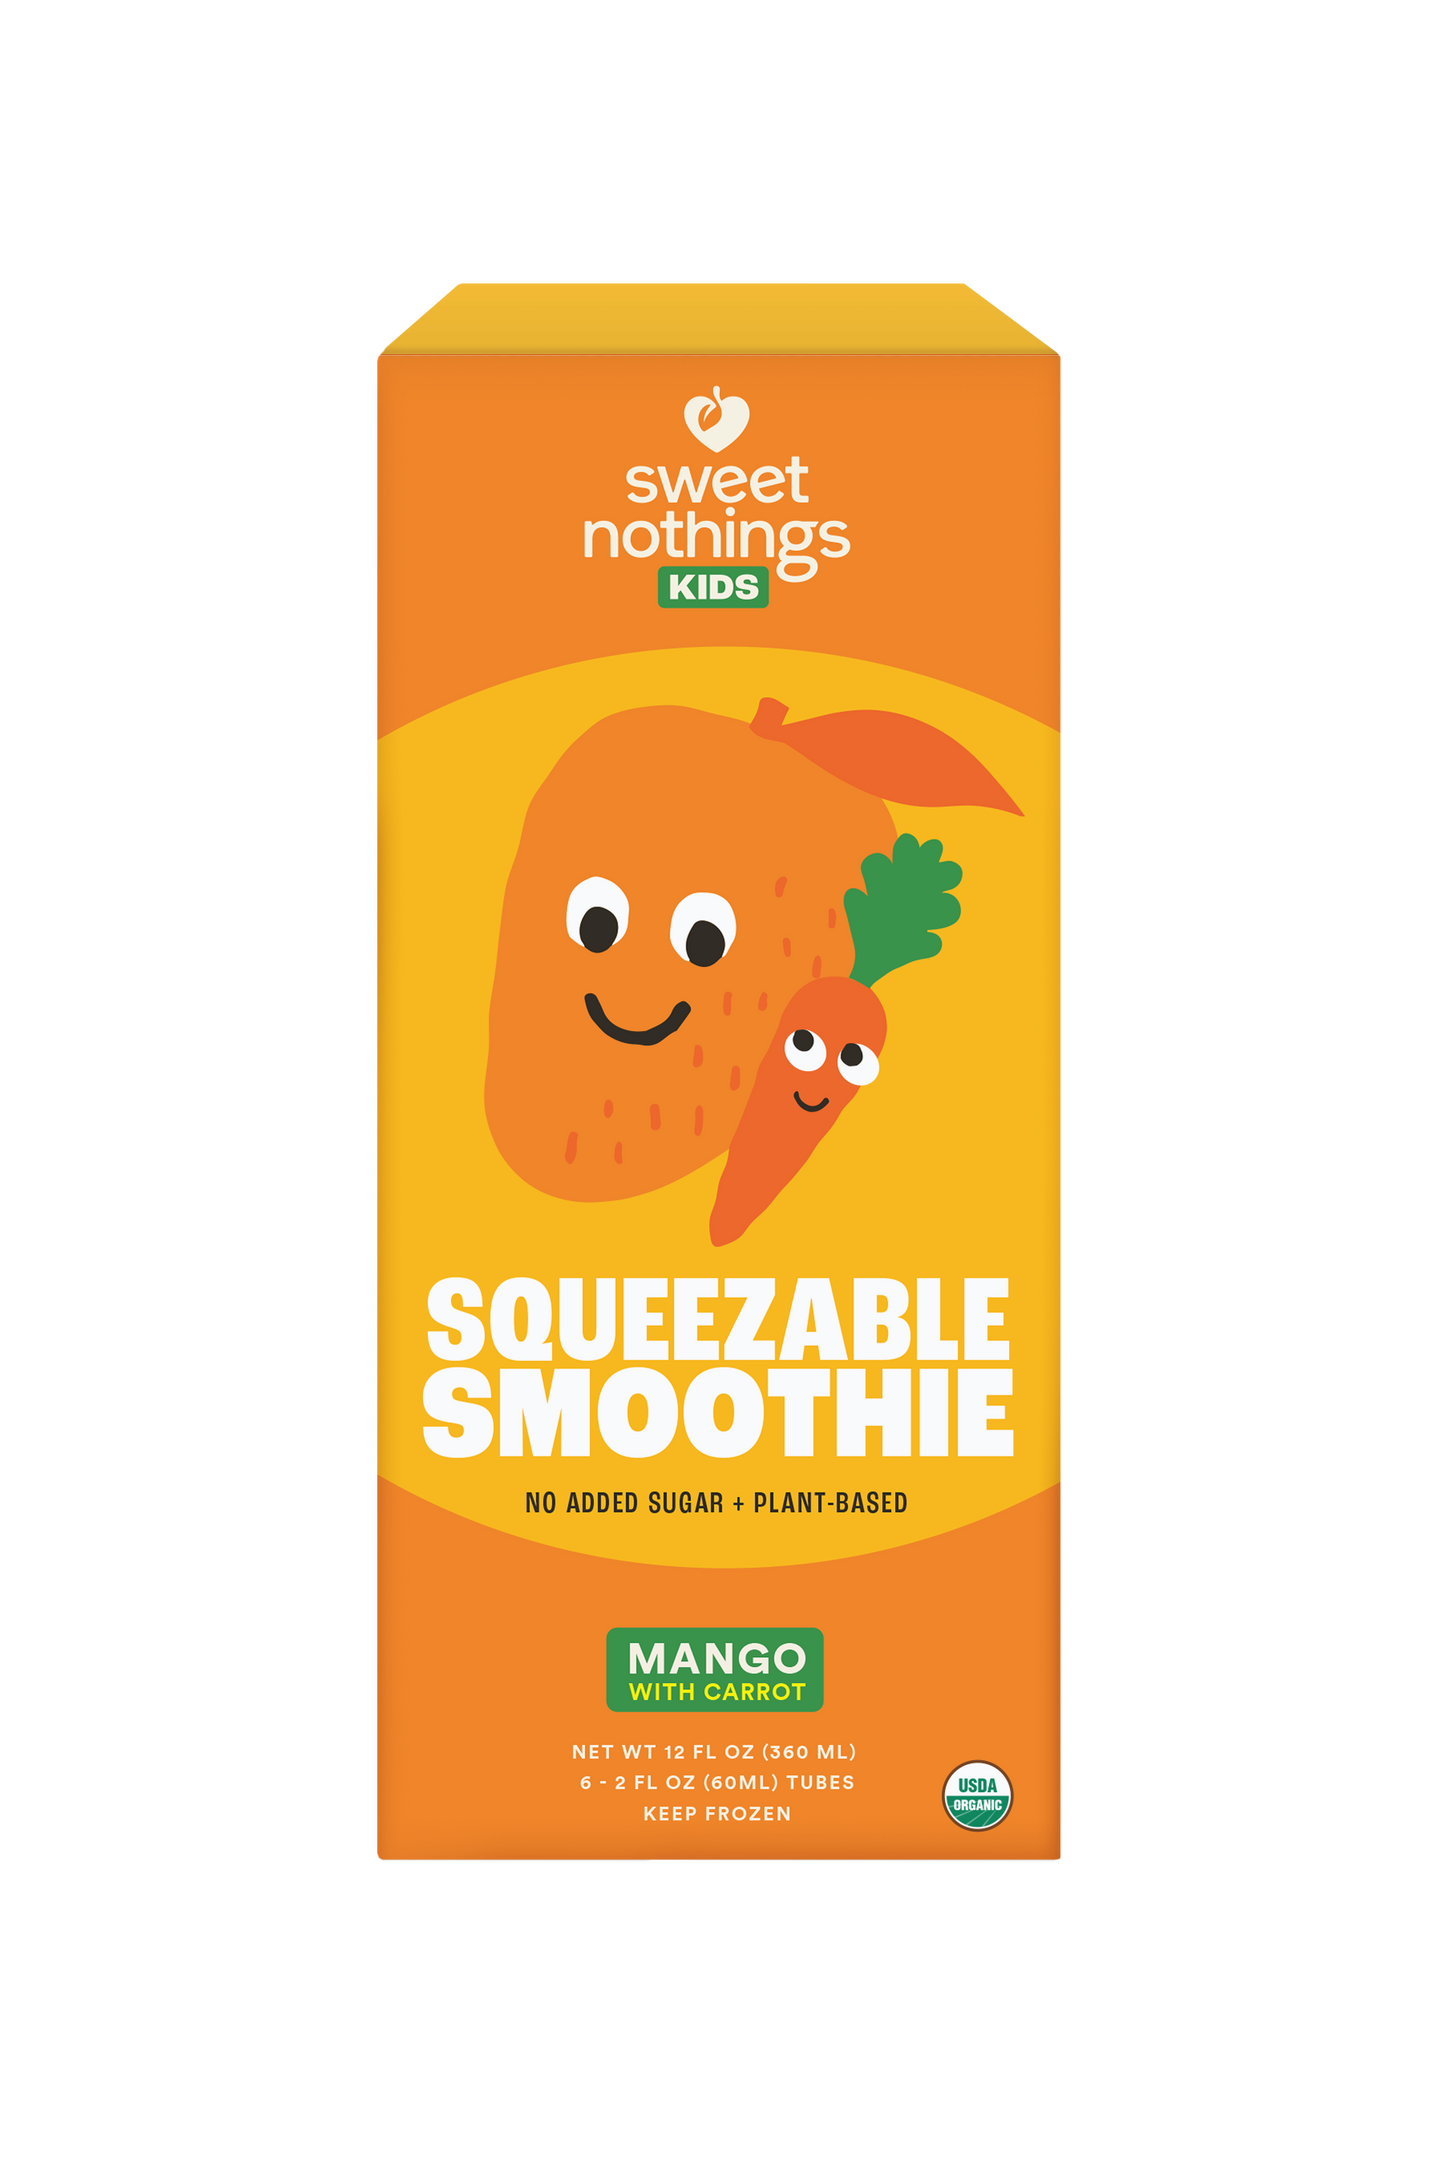 Sweet Nothings Mango Carrot Squeezable Smoothies